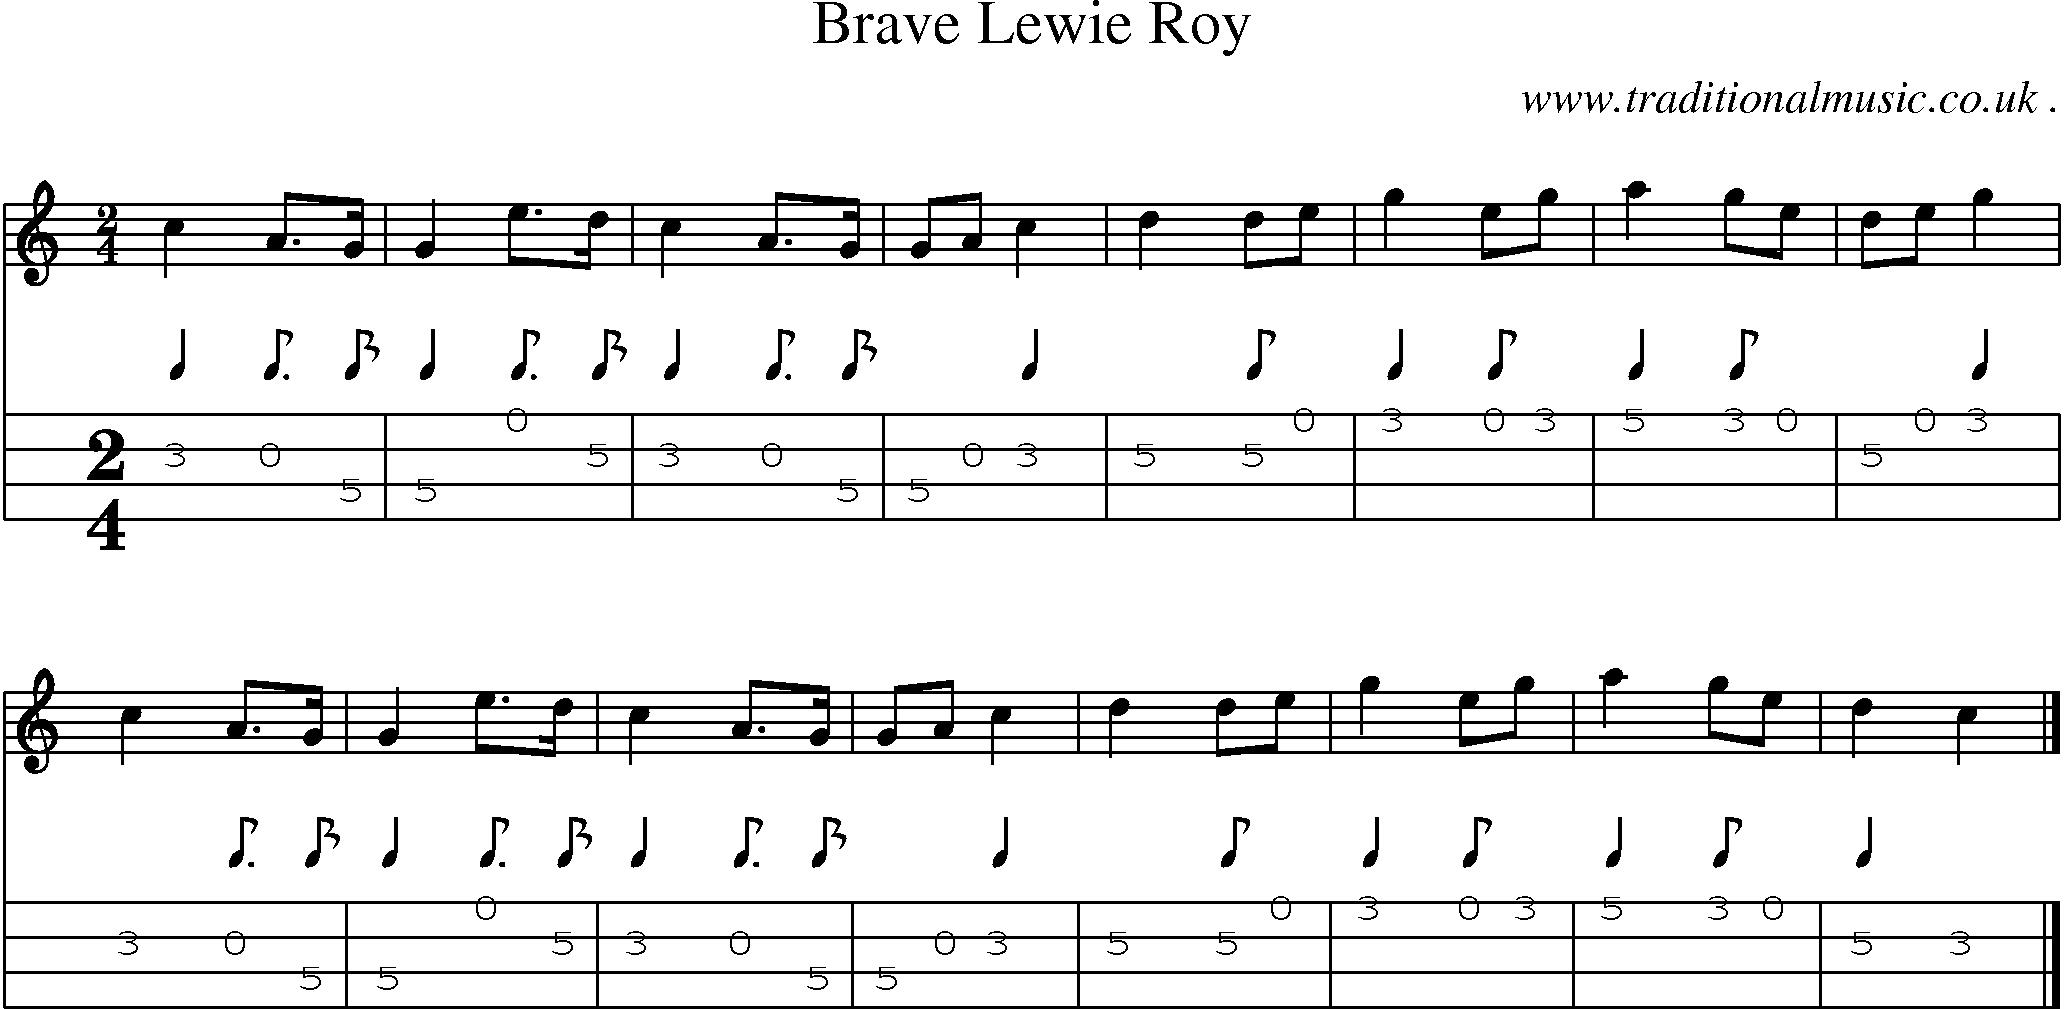 Sheet-music  score, Chords and Mandolin Tabs for Brave Lewie Roy